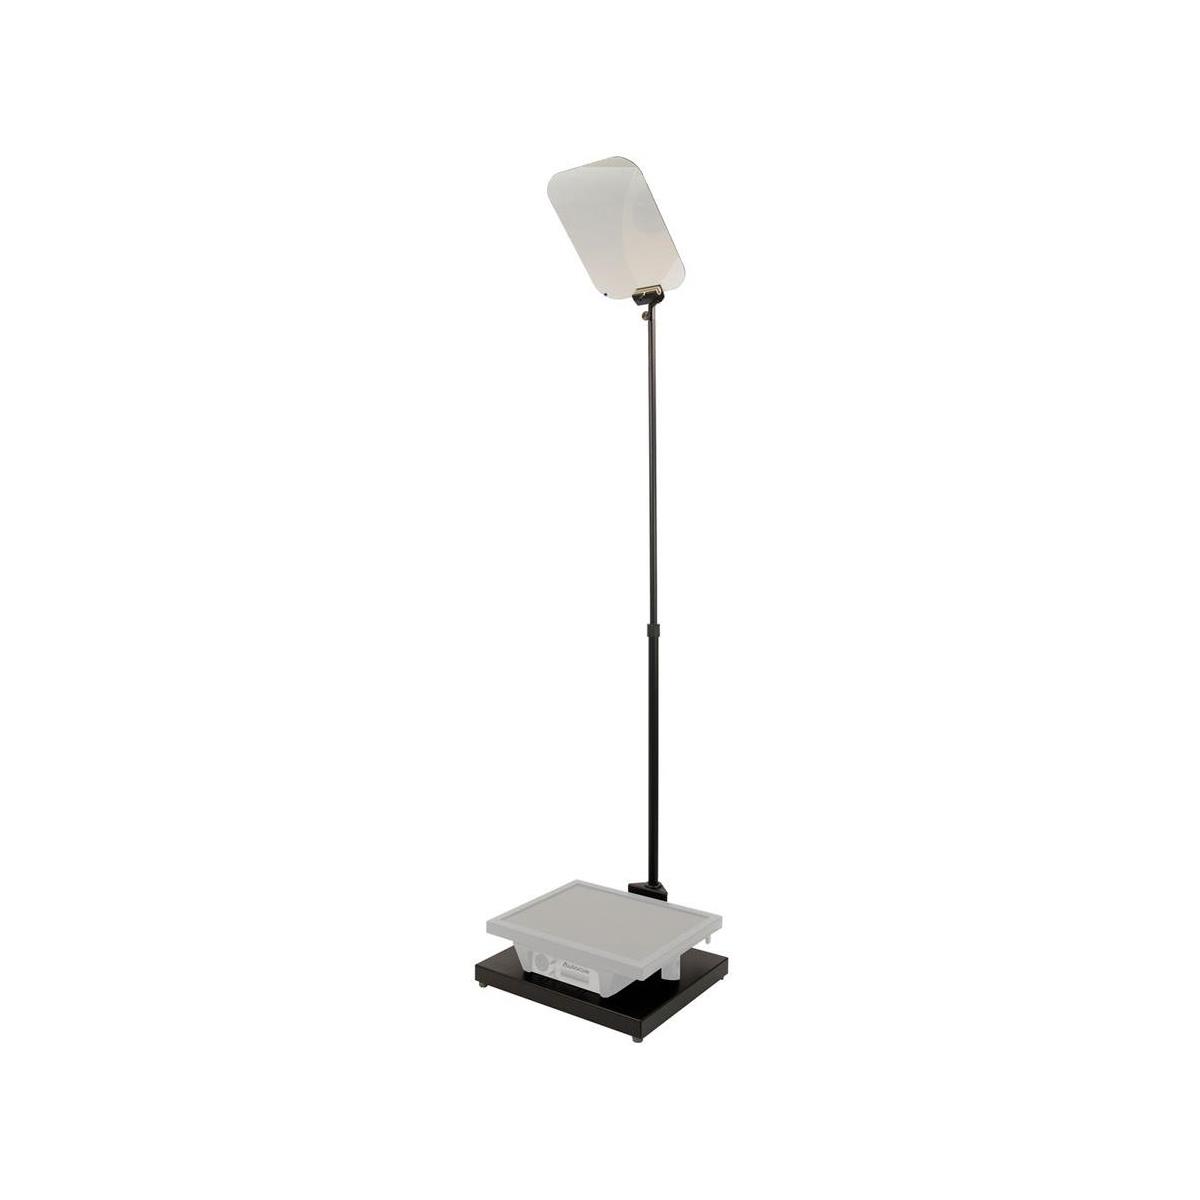 Image of Autocue Manual Conference Stand for Teleprompters (No Glass Holder or Glass)